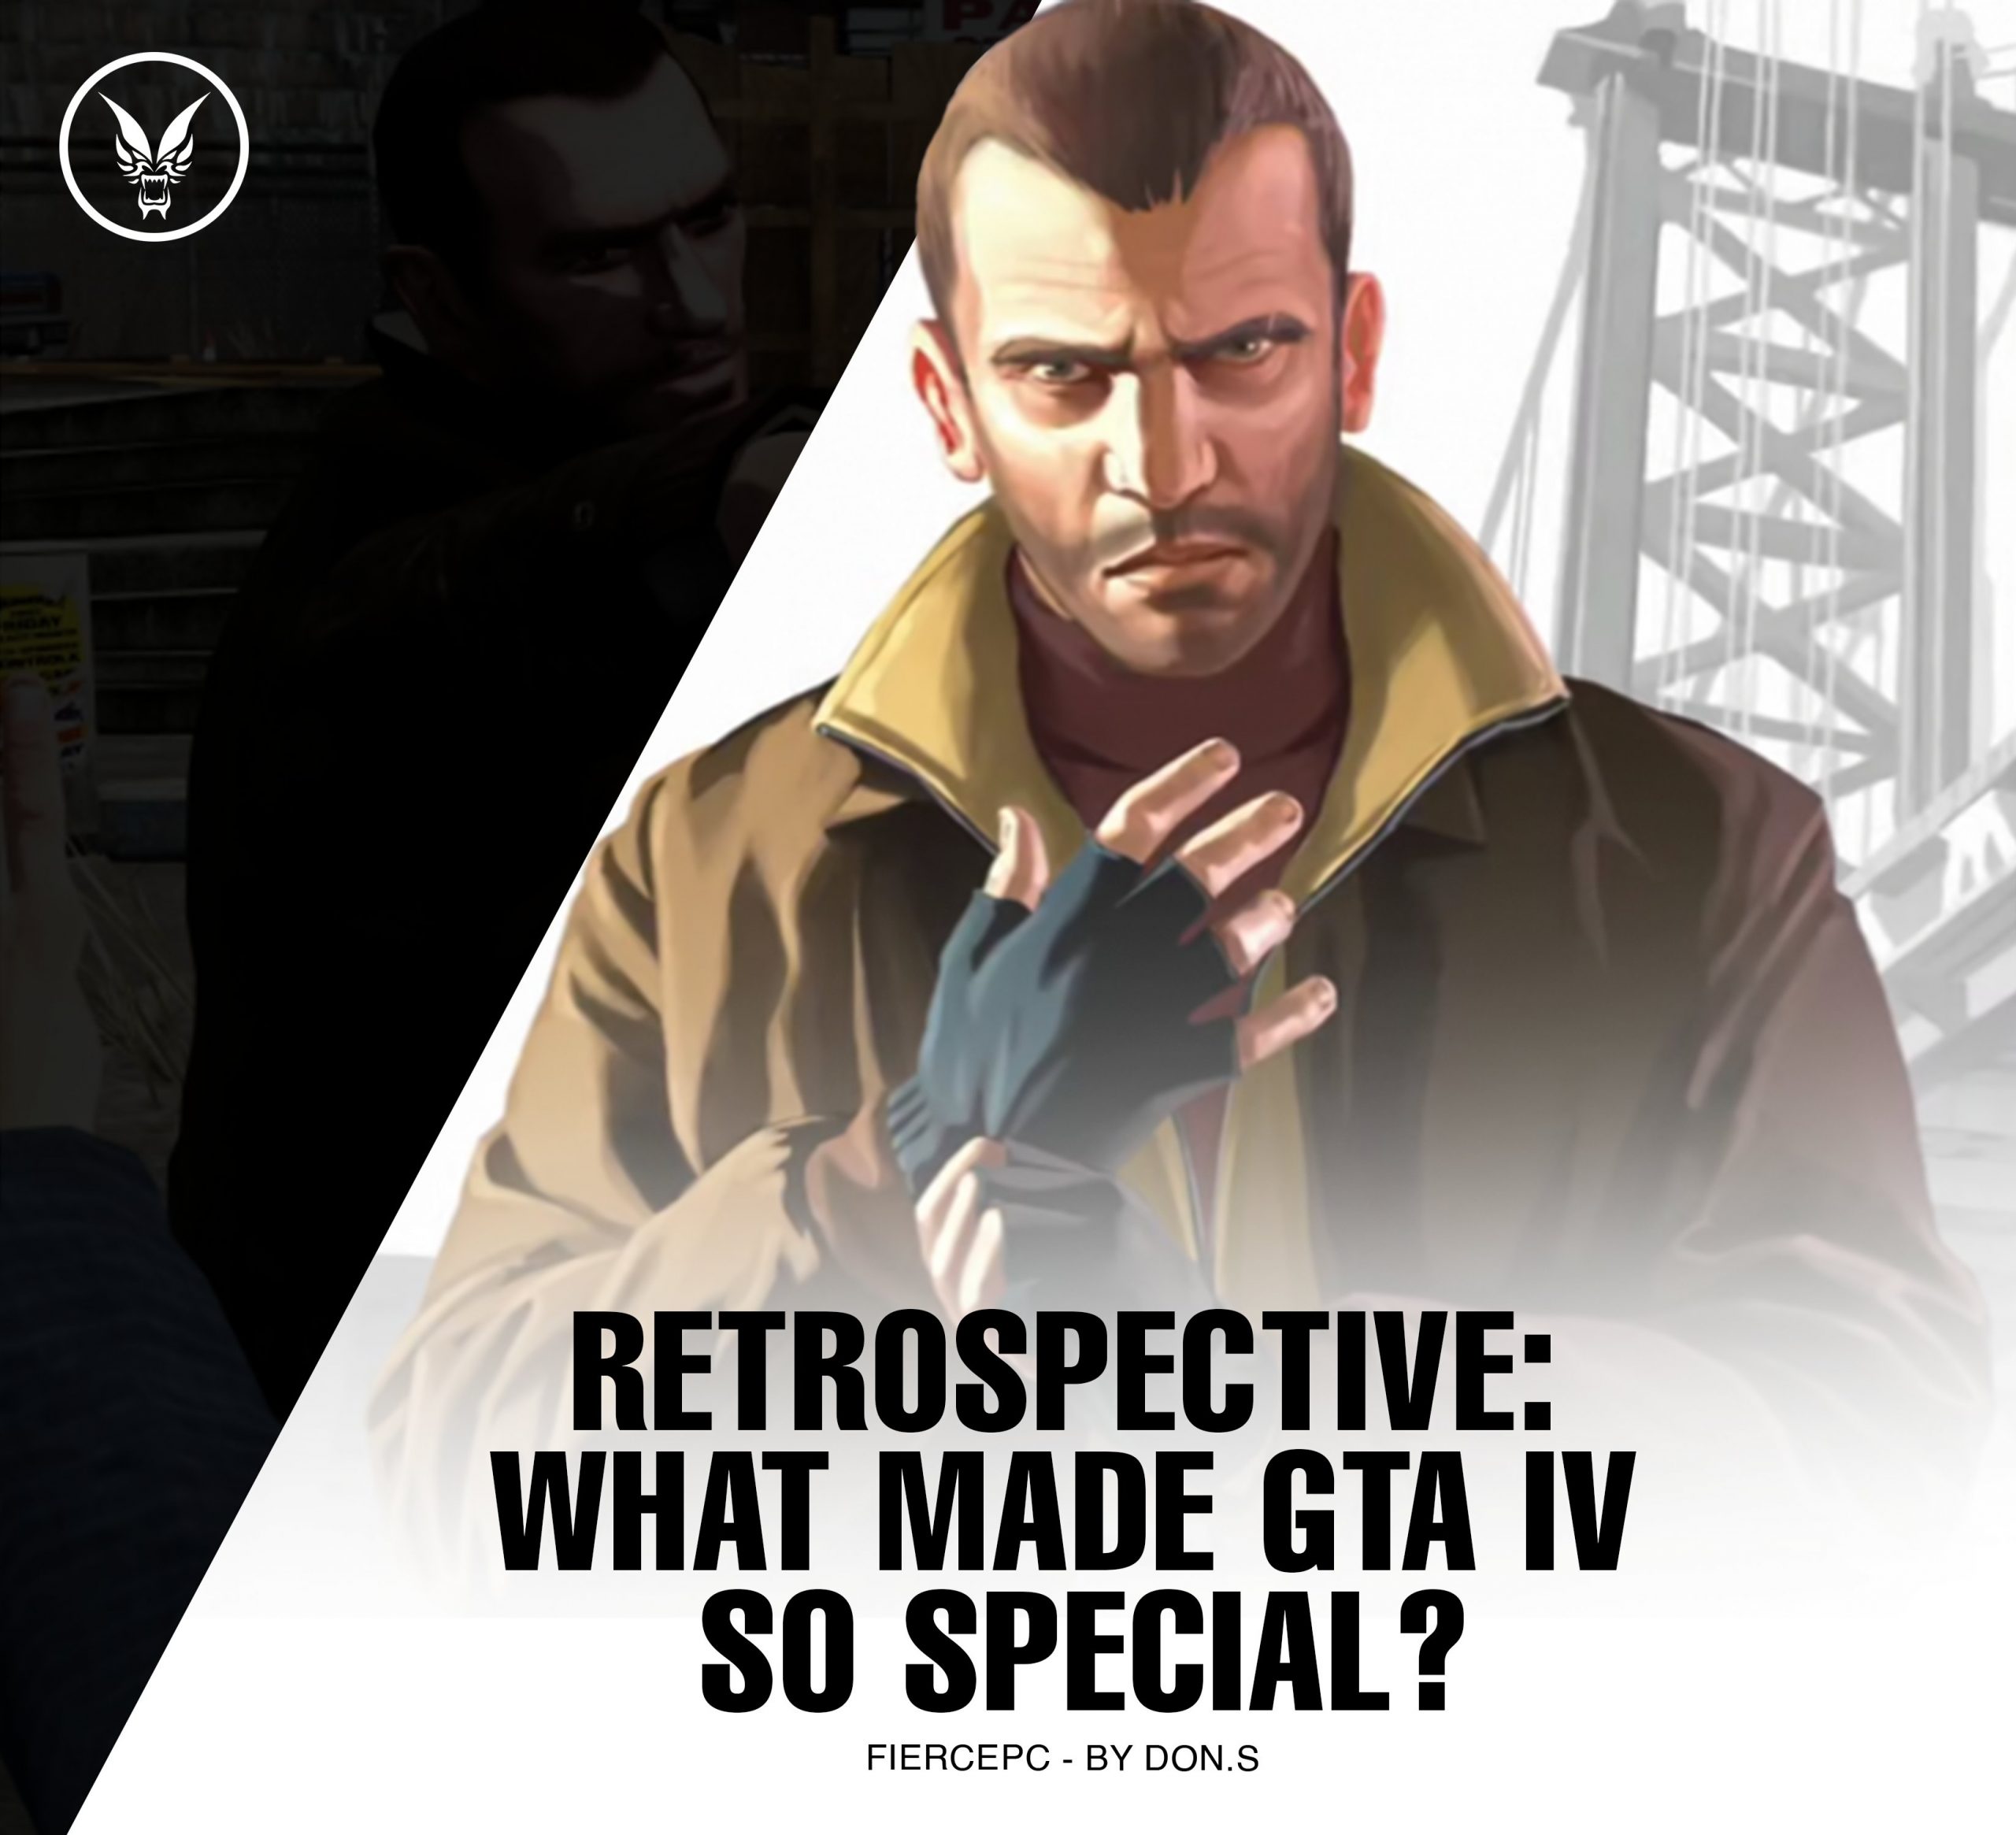 This film shows the atrocities of Niko Bellic before GTA IV. Or at